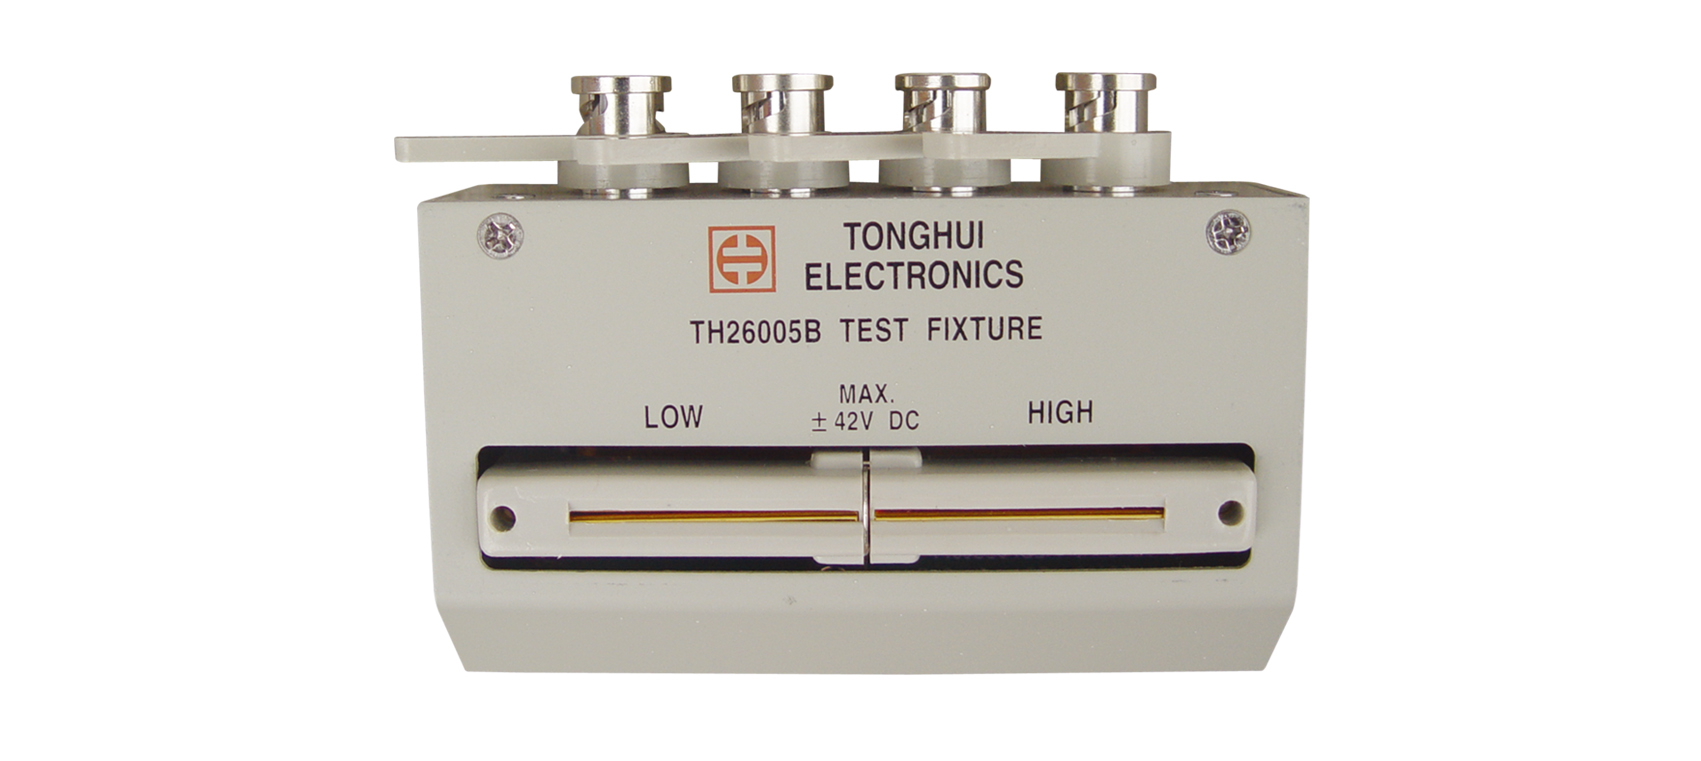 TH26001A four-terminal test fixture #W7792 WX 1PC NEW Tonghui 